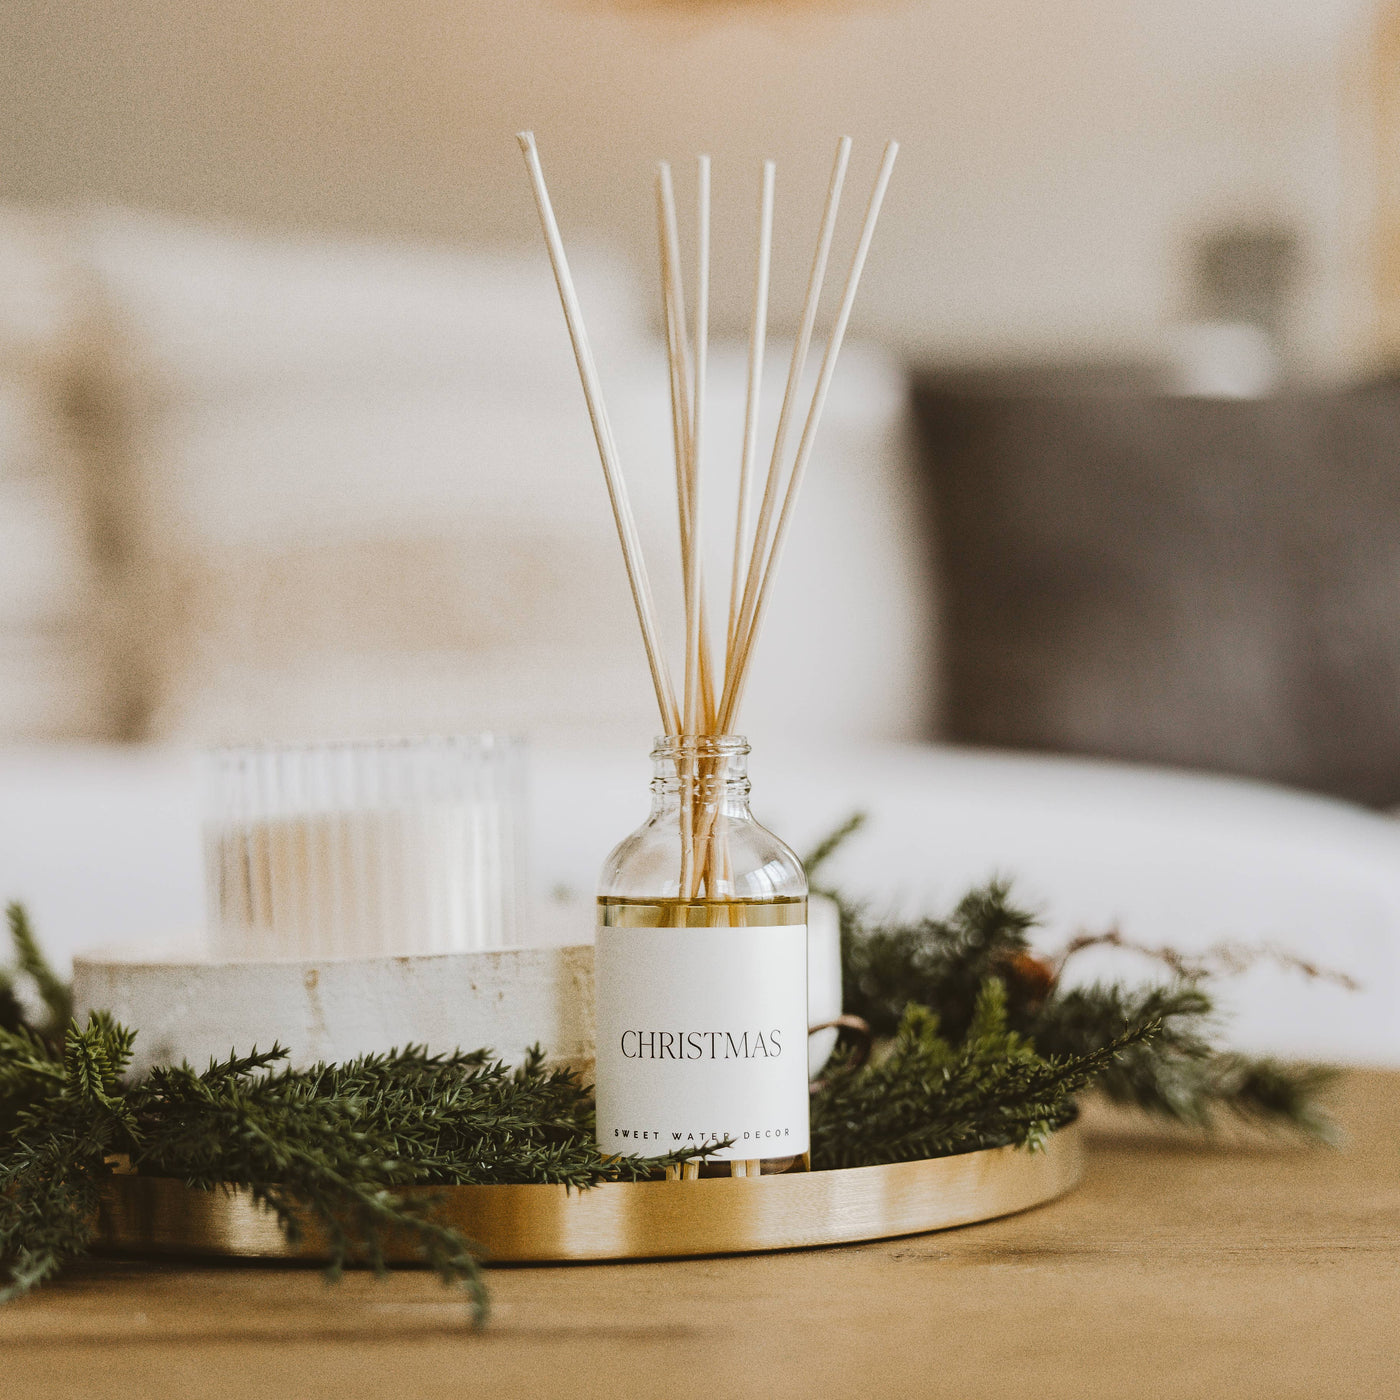 CHRISTMAS CLEAR REED DIFFUSER